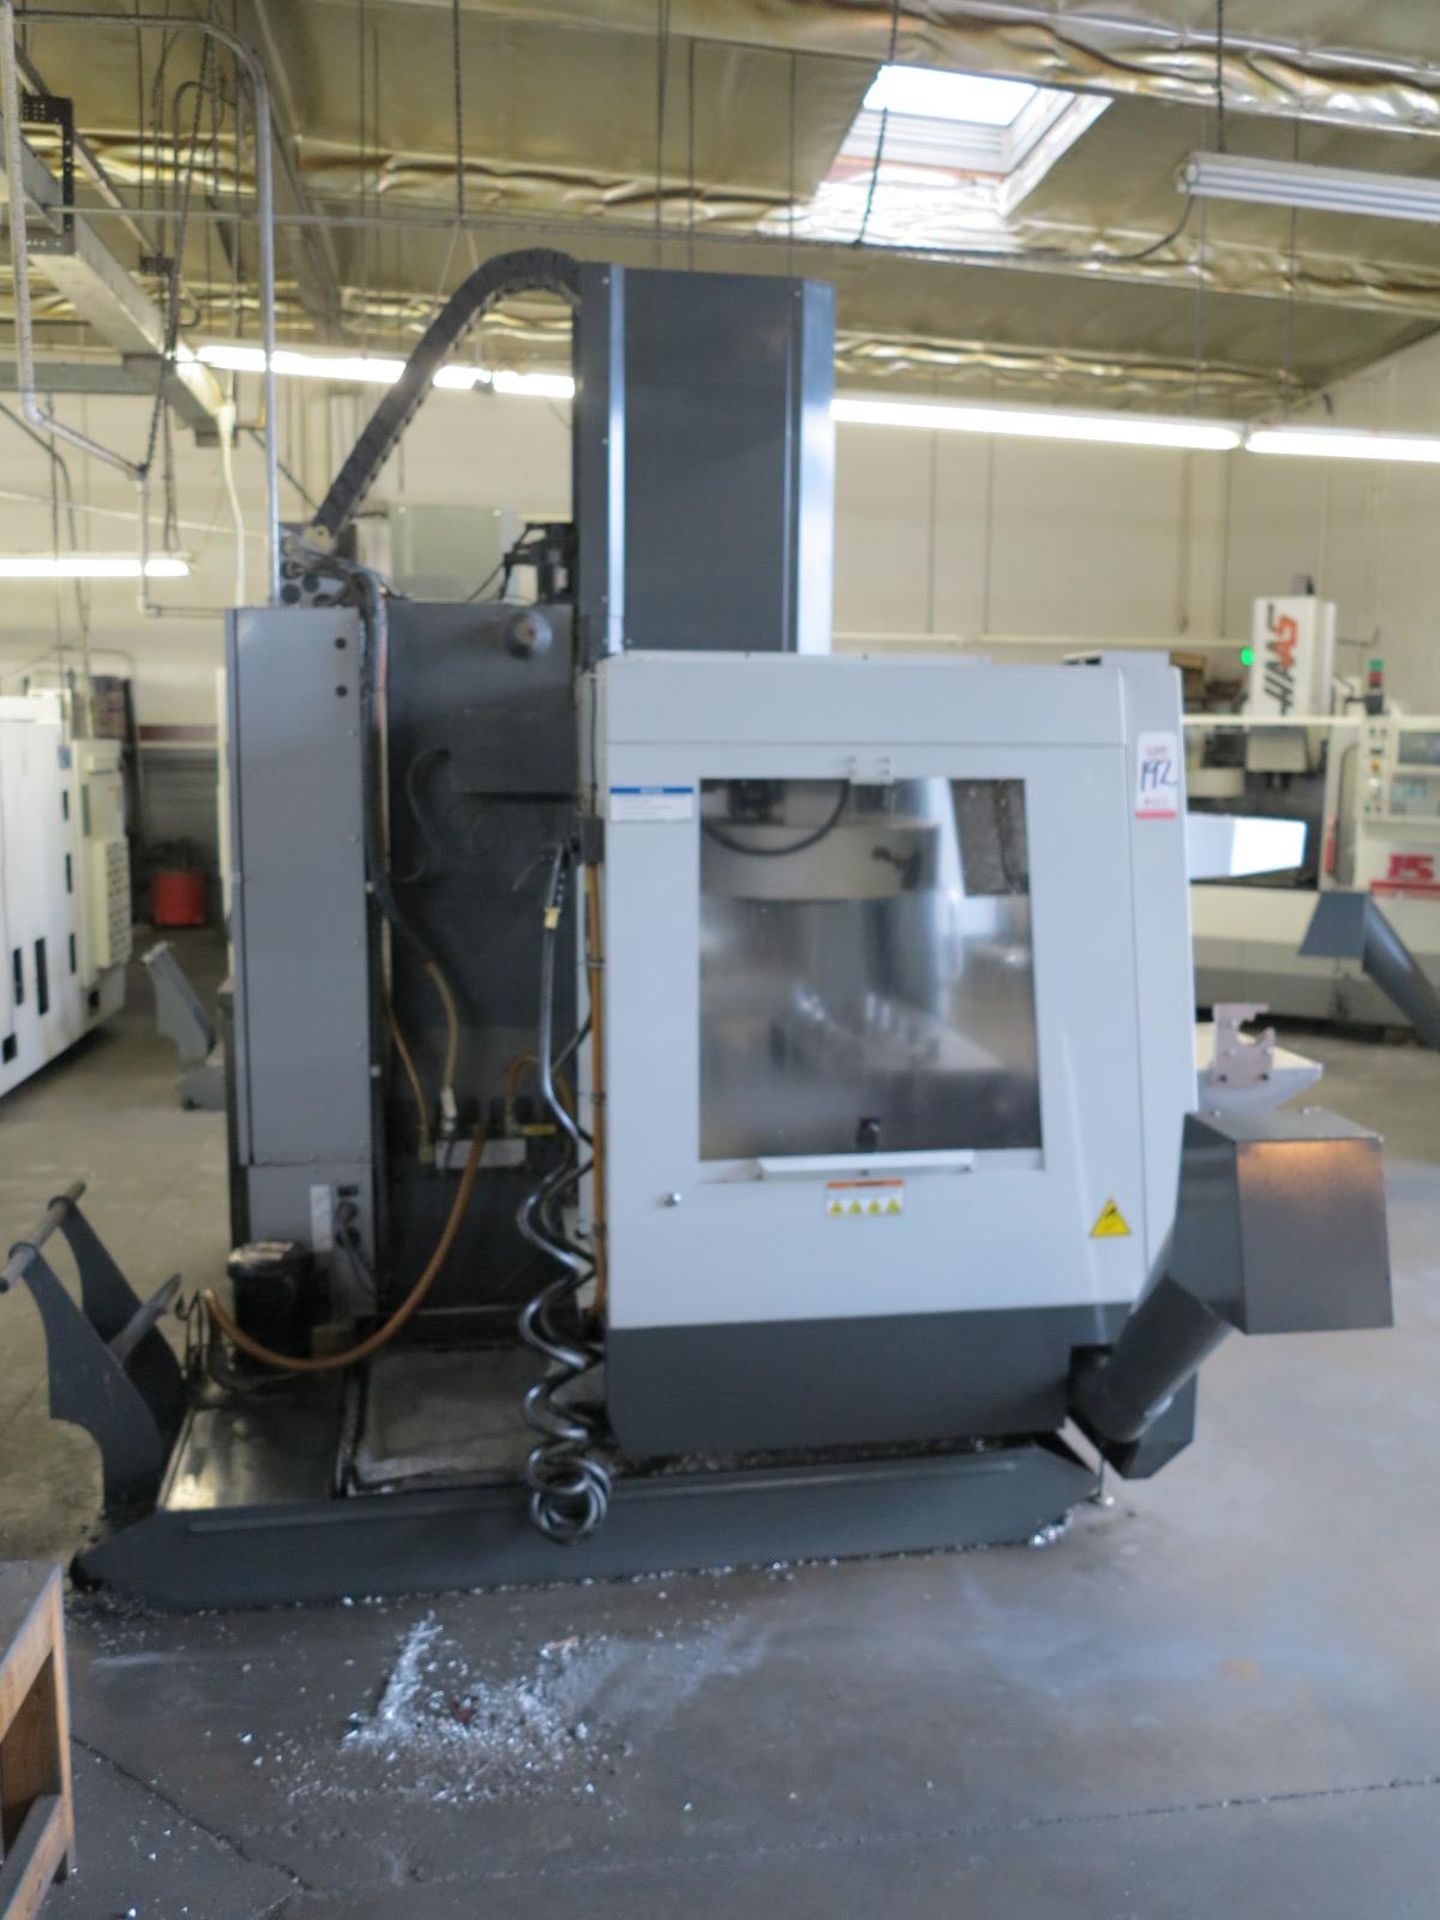 2010 HAAS VF-2 CNC VERTICAL MACHINING CENTER, S/N 1080331, 30" X, 16" Y, 20" Z, 36" X 14" TABLE, - Image 5 of 9